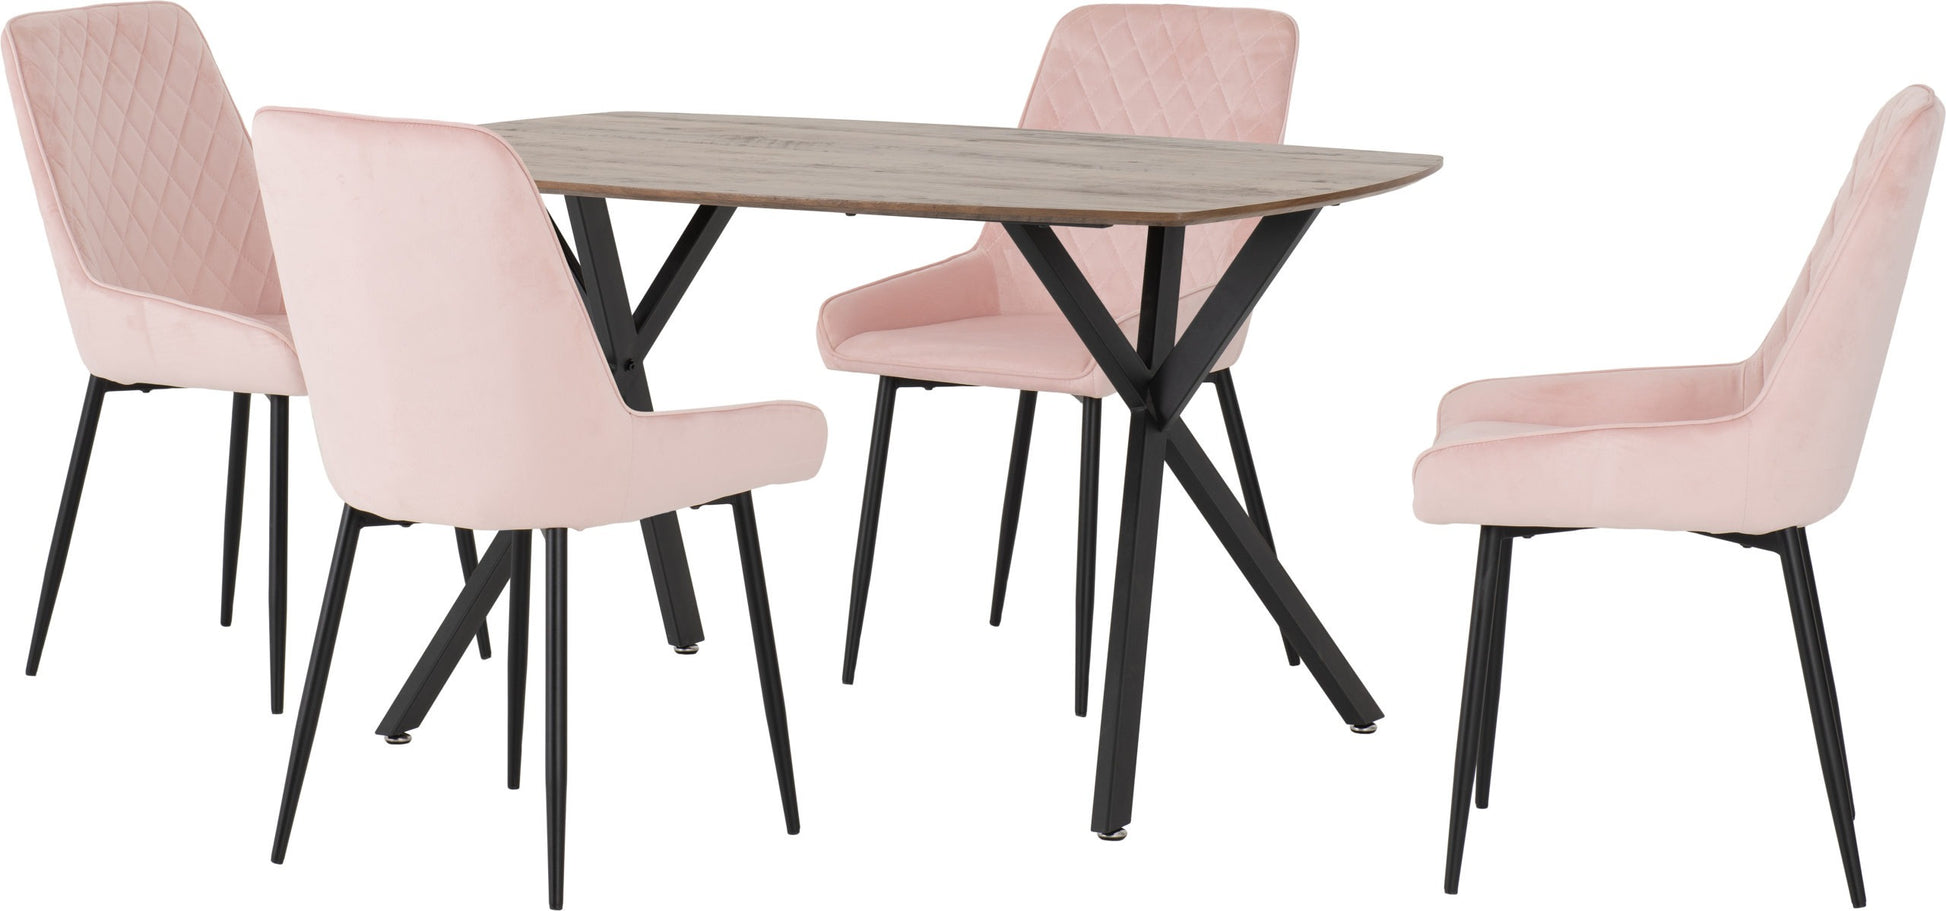 Athens Rectangular Dining Set with Avery Chairs - Medium Oak Effect/Black/Baby Pink Velvet- The Right Buy Store